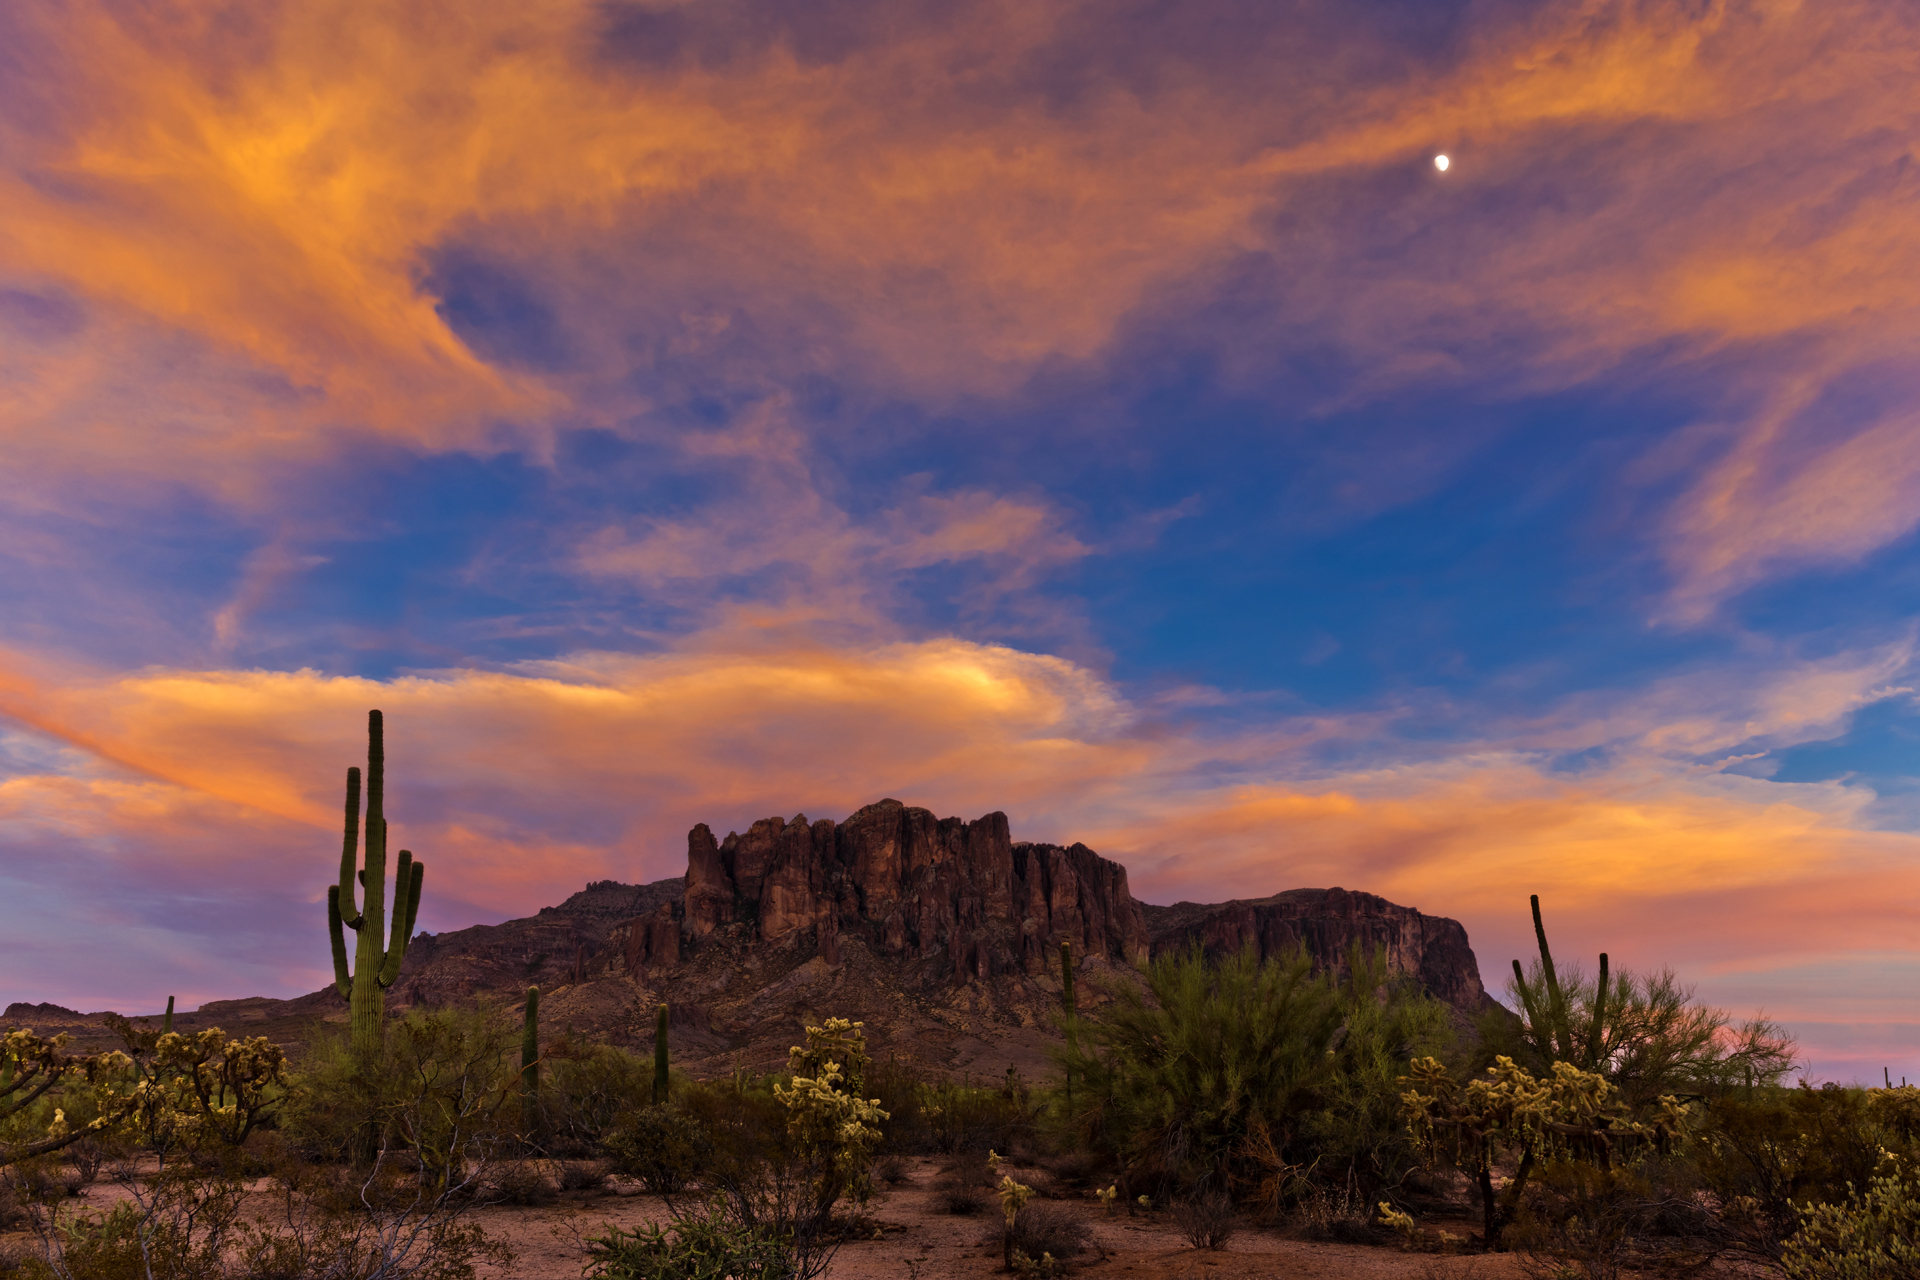 Sunset over Lost Dutchman State Park near the Superstition Mountains